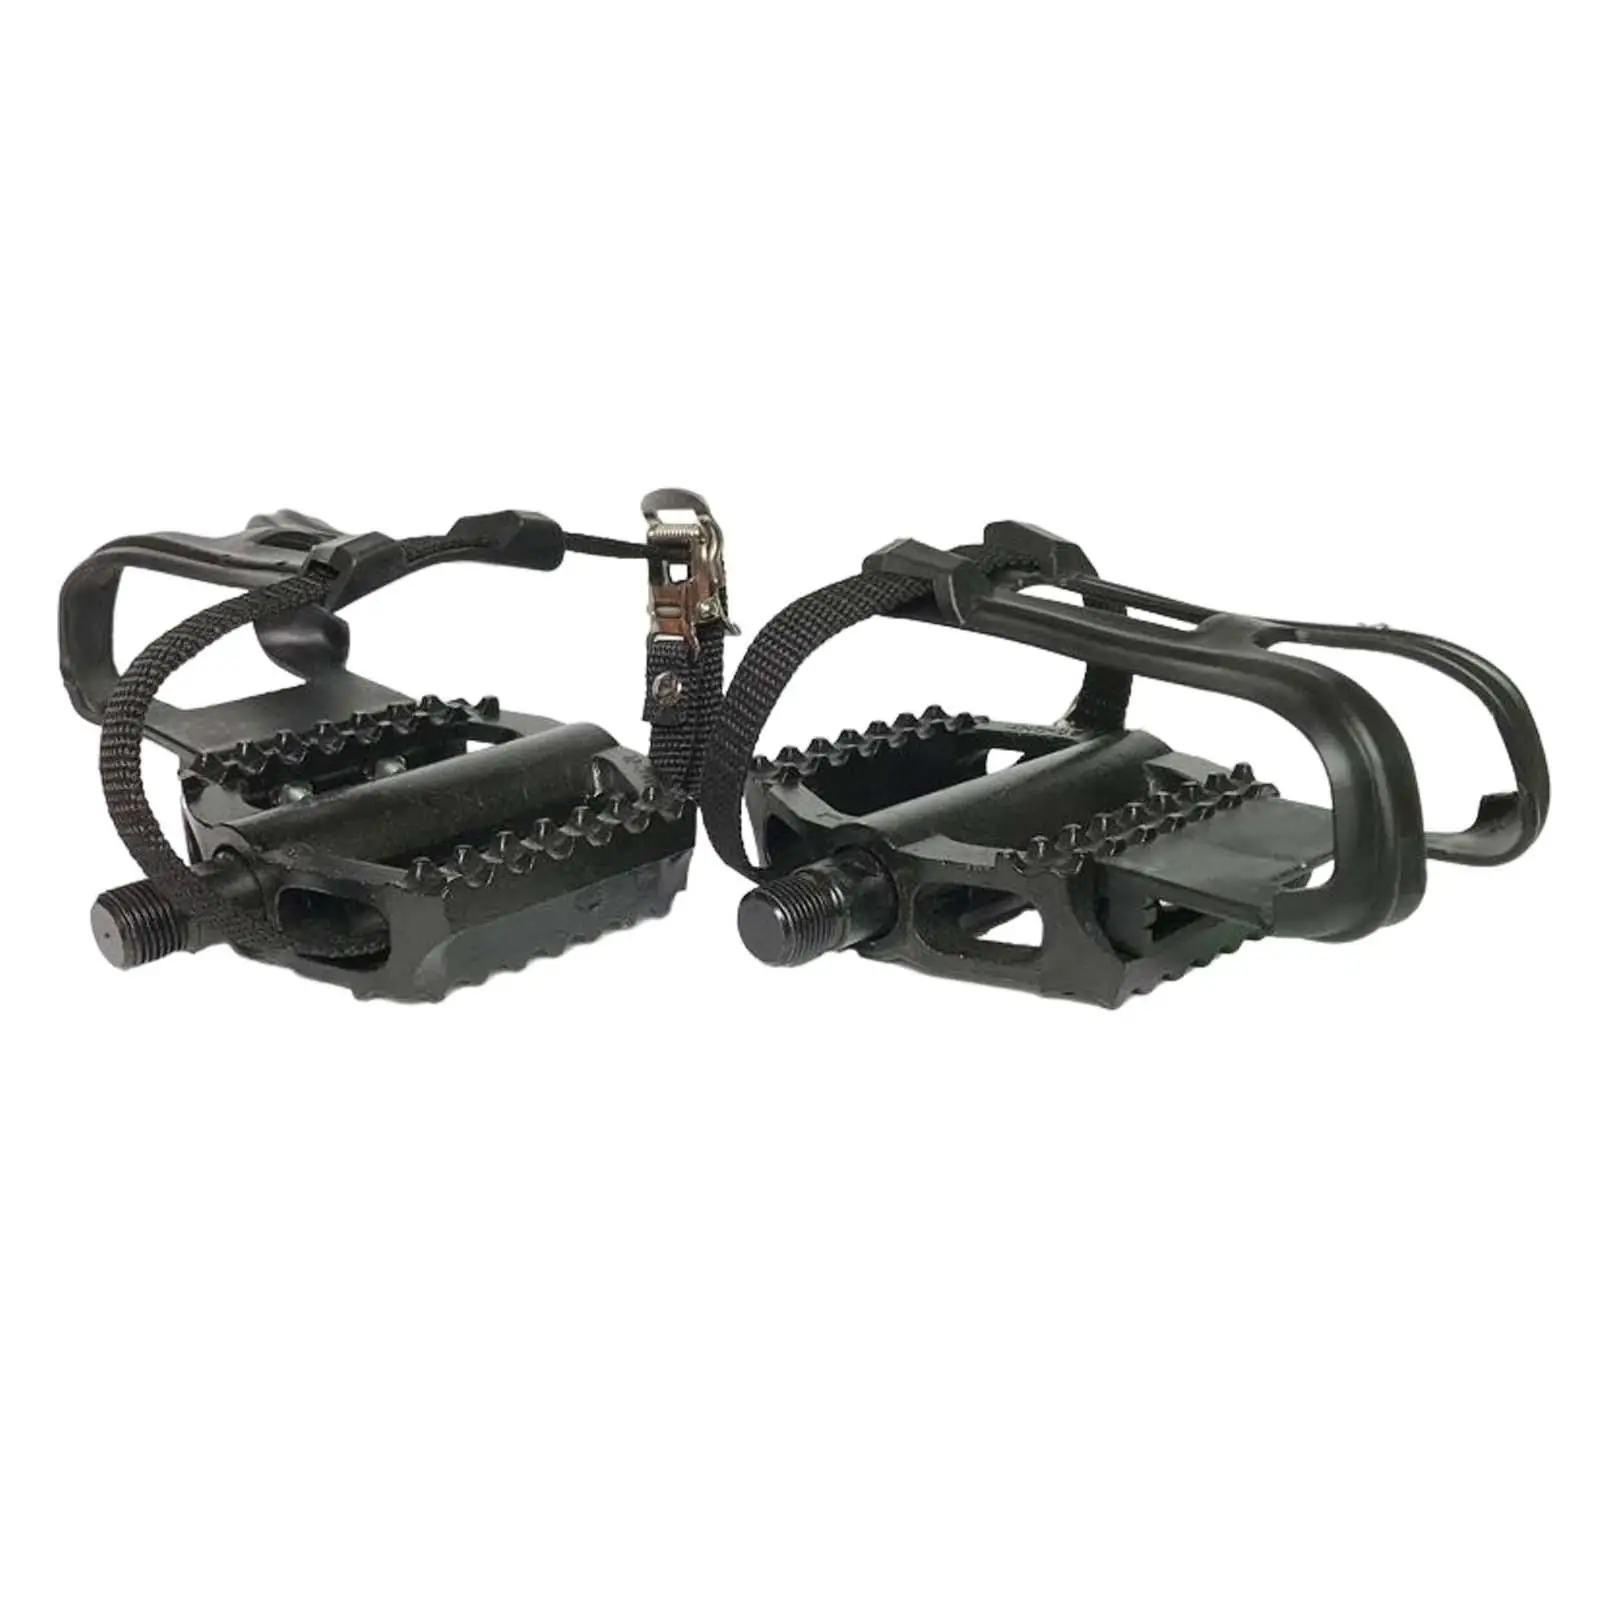 1 Pair Exercise Bike Pedals with Adjustable Straps 18mm Axle with Toe Cages for Cycling Gym Indoor Accessories Replacement